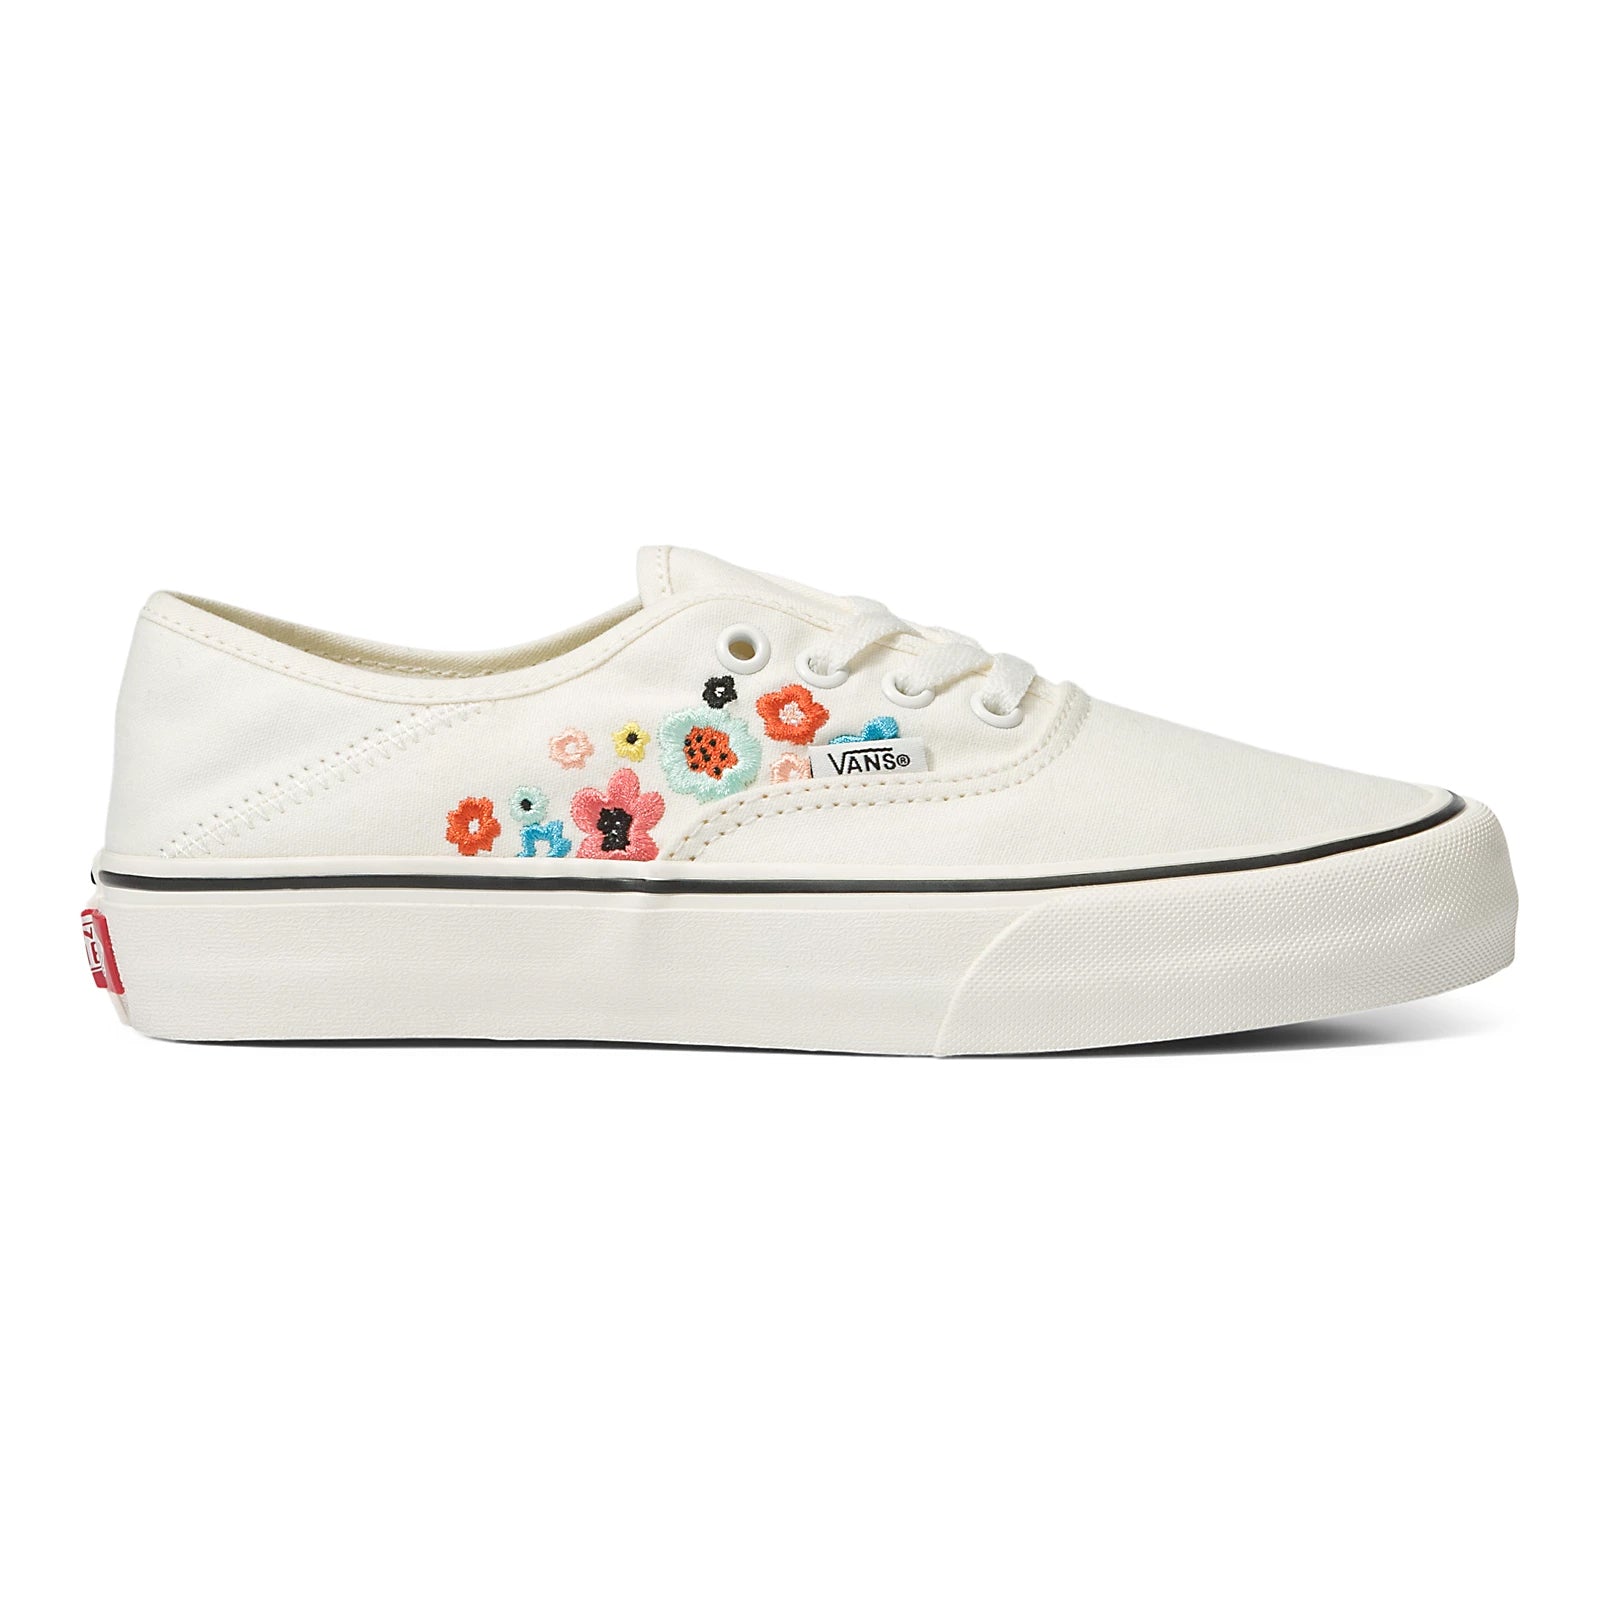 Vans Womens UA Authentic VR3 GroovyFloral/Marshmallow 6w